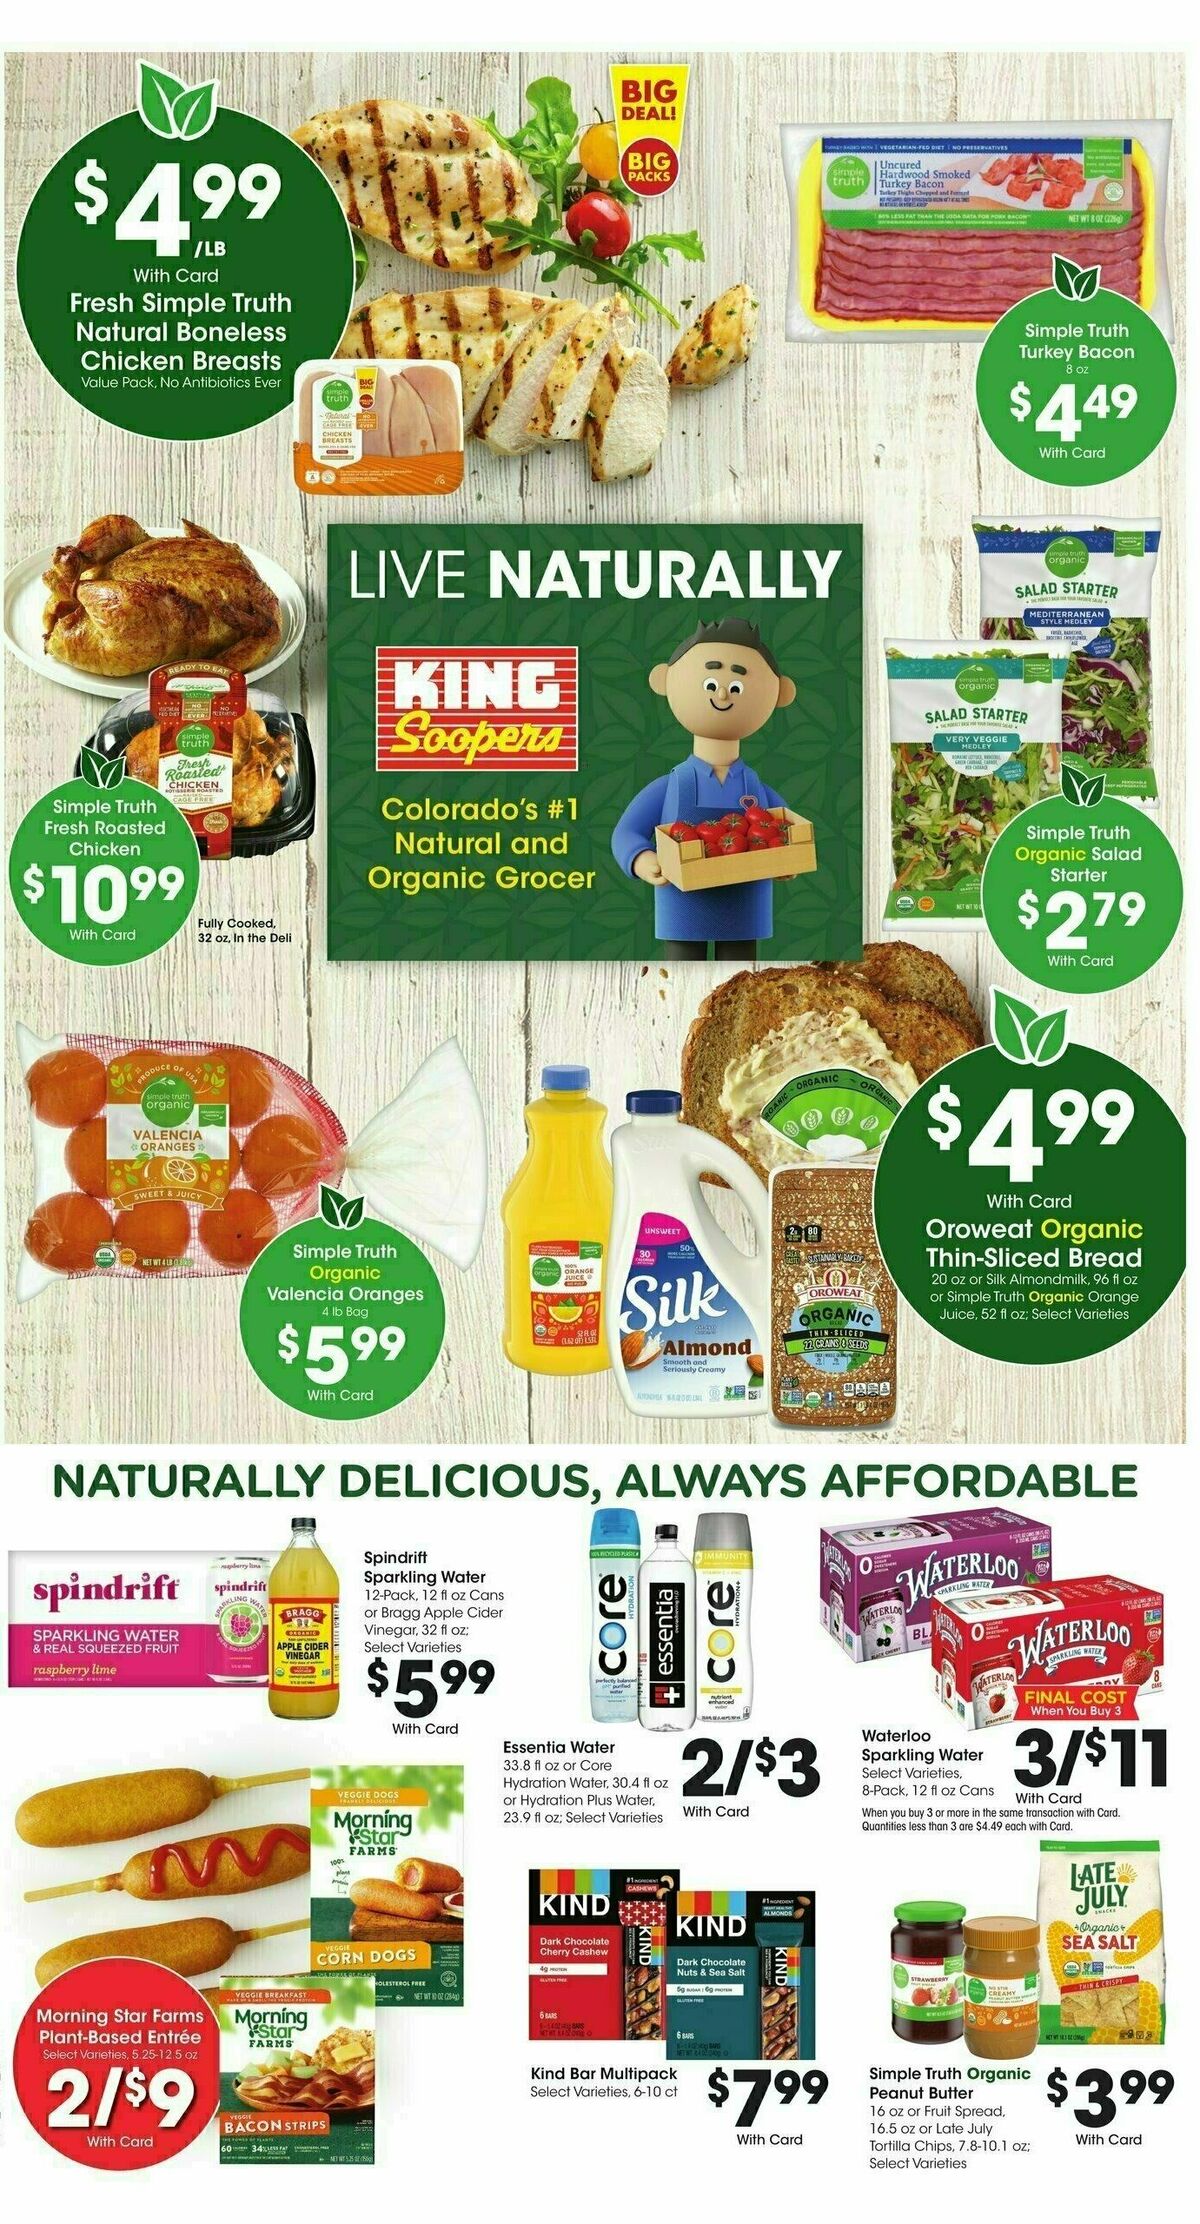 King Soopers Weekly Ad from August 30